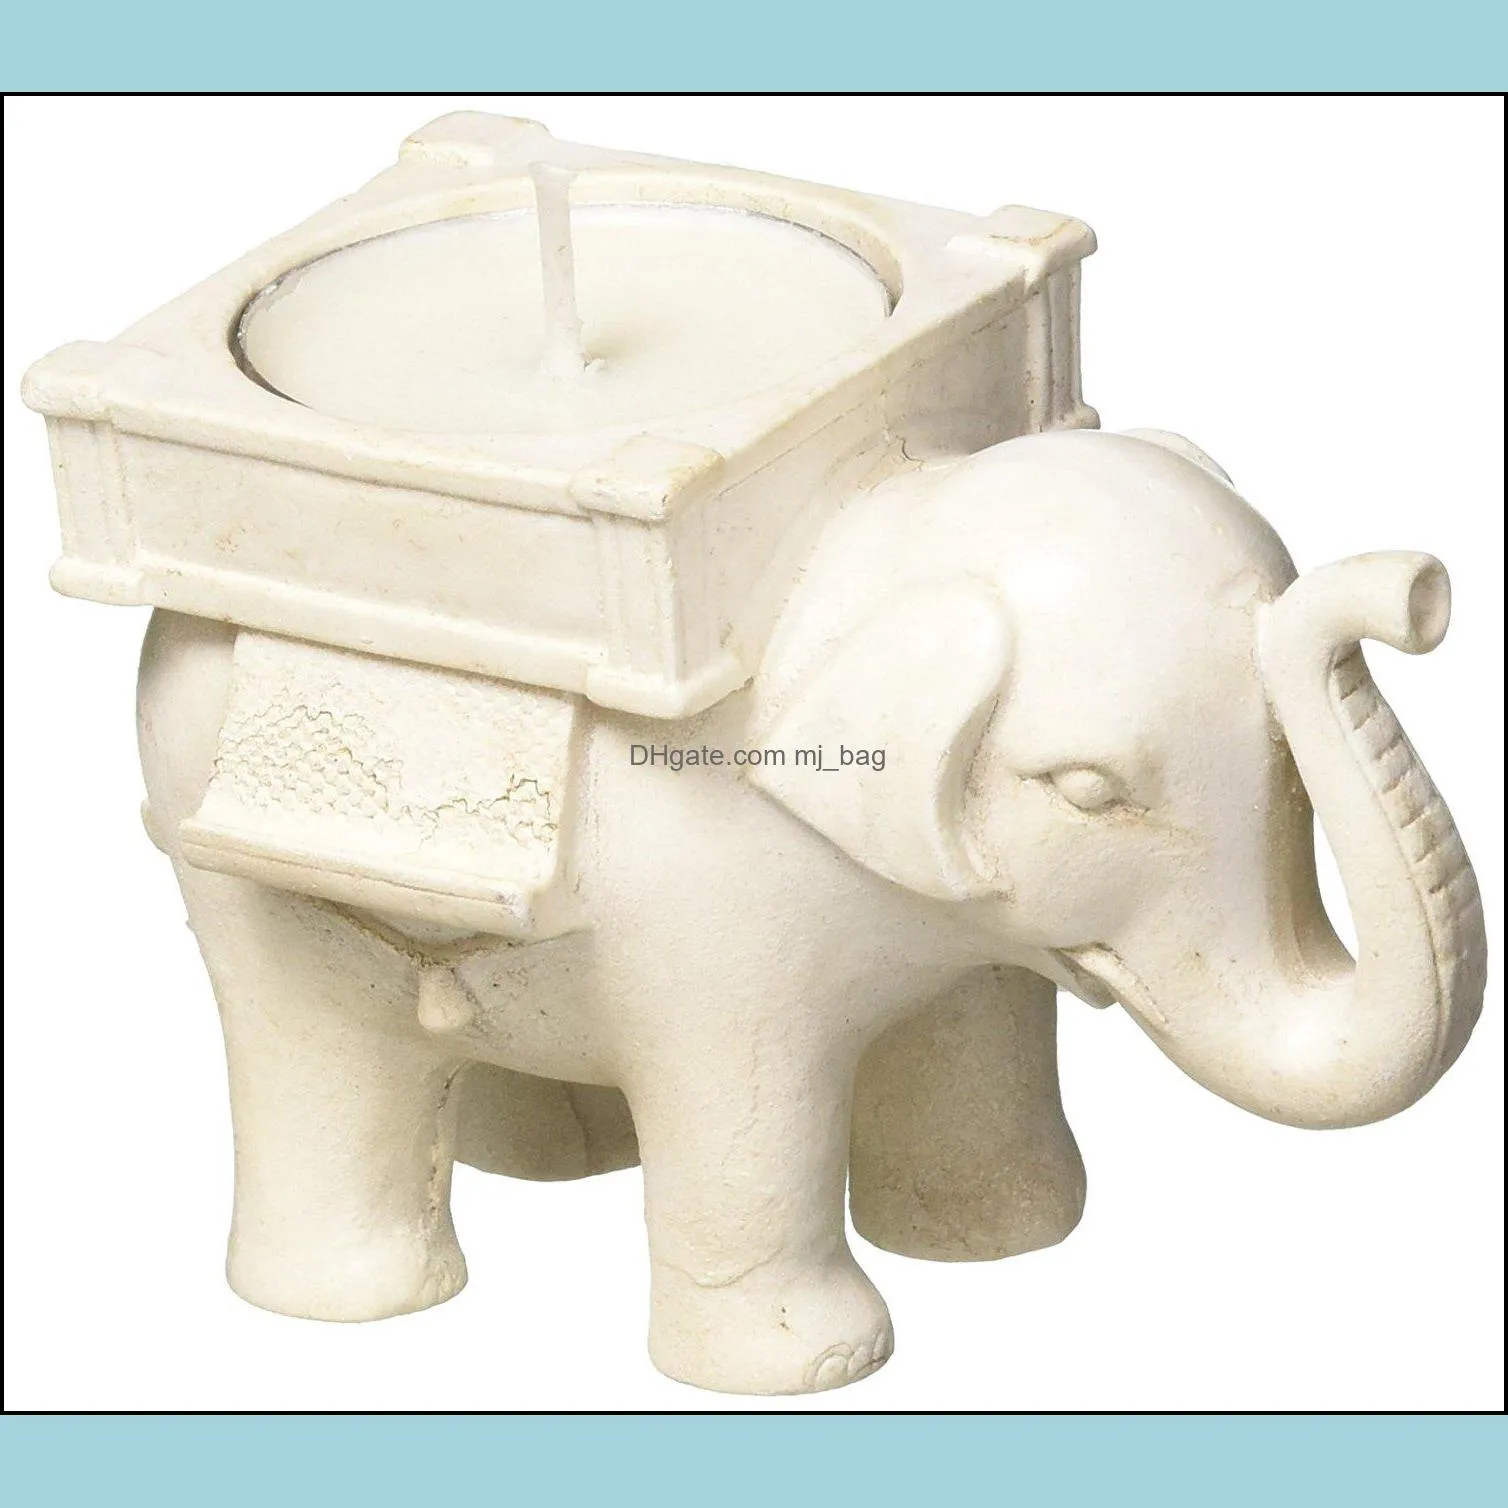 lucky elephant antique ivory candle holders placecard holder candlesticks birthday wedding party home decoration craft gift